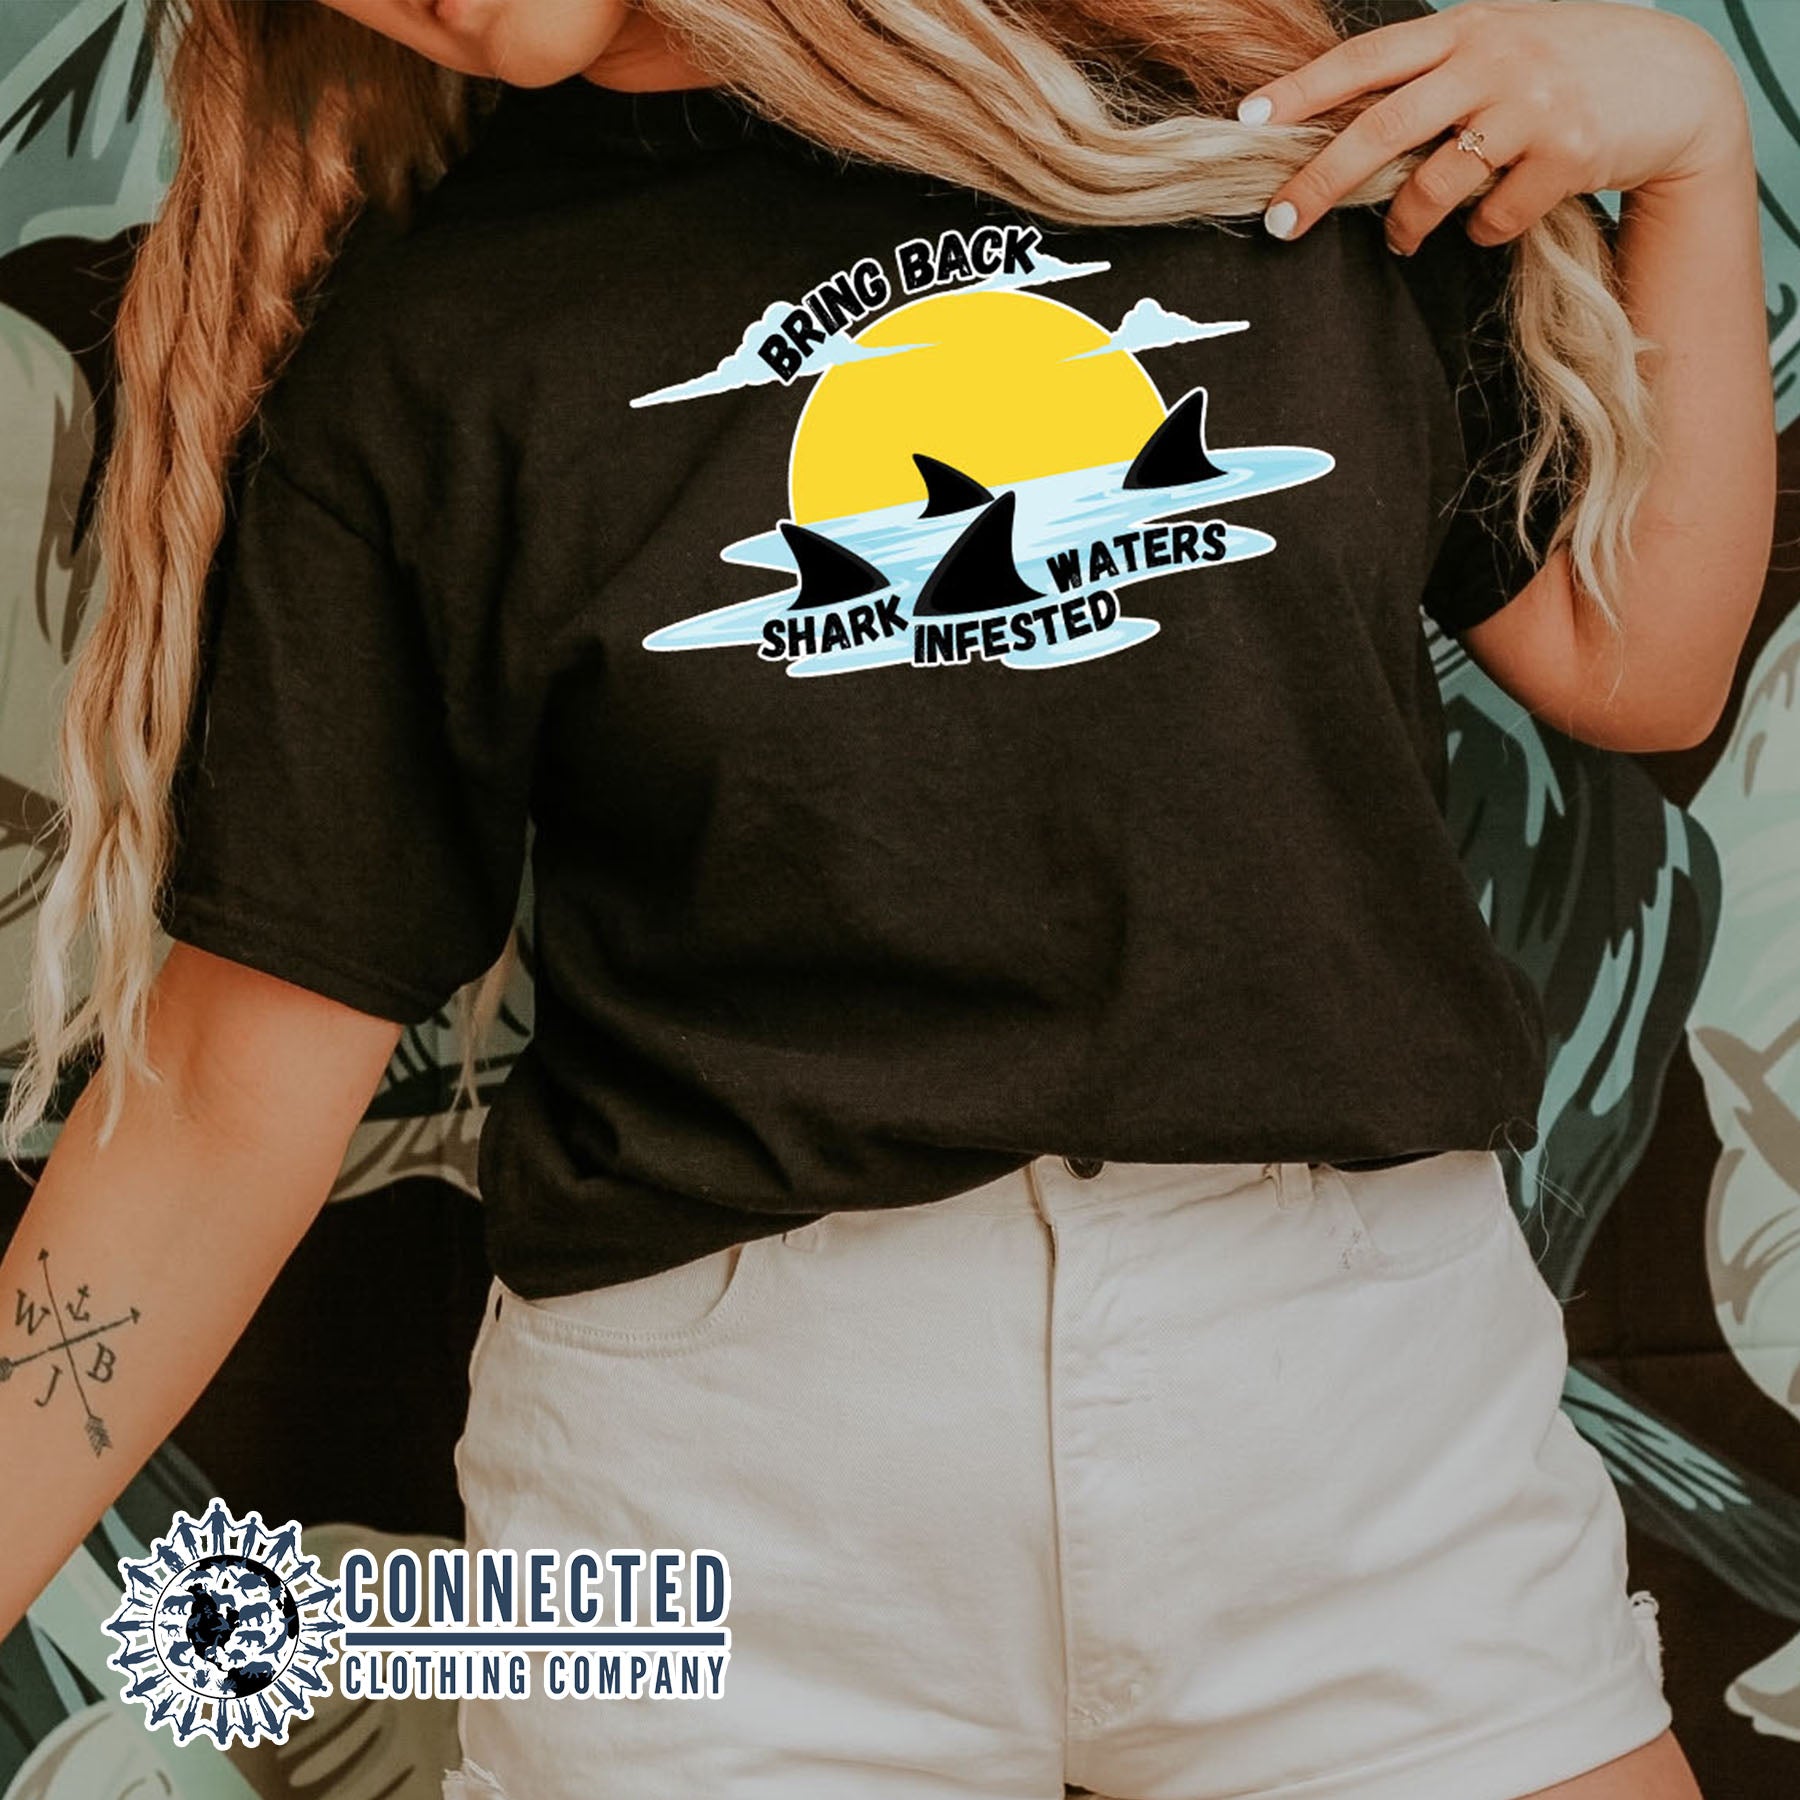 Model Wearing Black Bring Back Shark Infested Waters Unisex Short-Sleeve Tee - Connected Clothing Company - Ethically and Sustainably Made - 10% of profits donated to shark conservation and ocean conservation